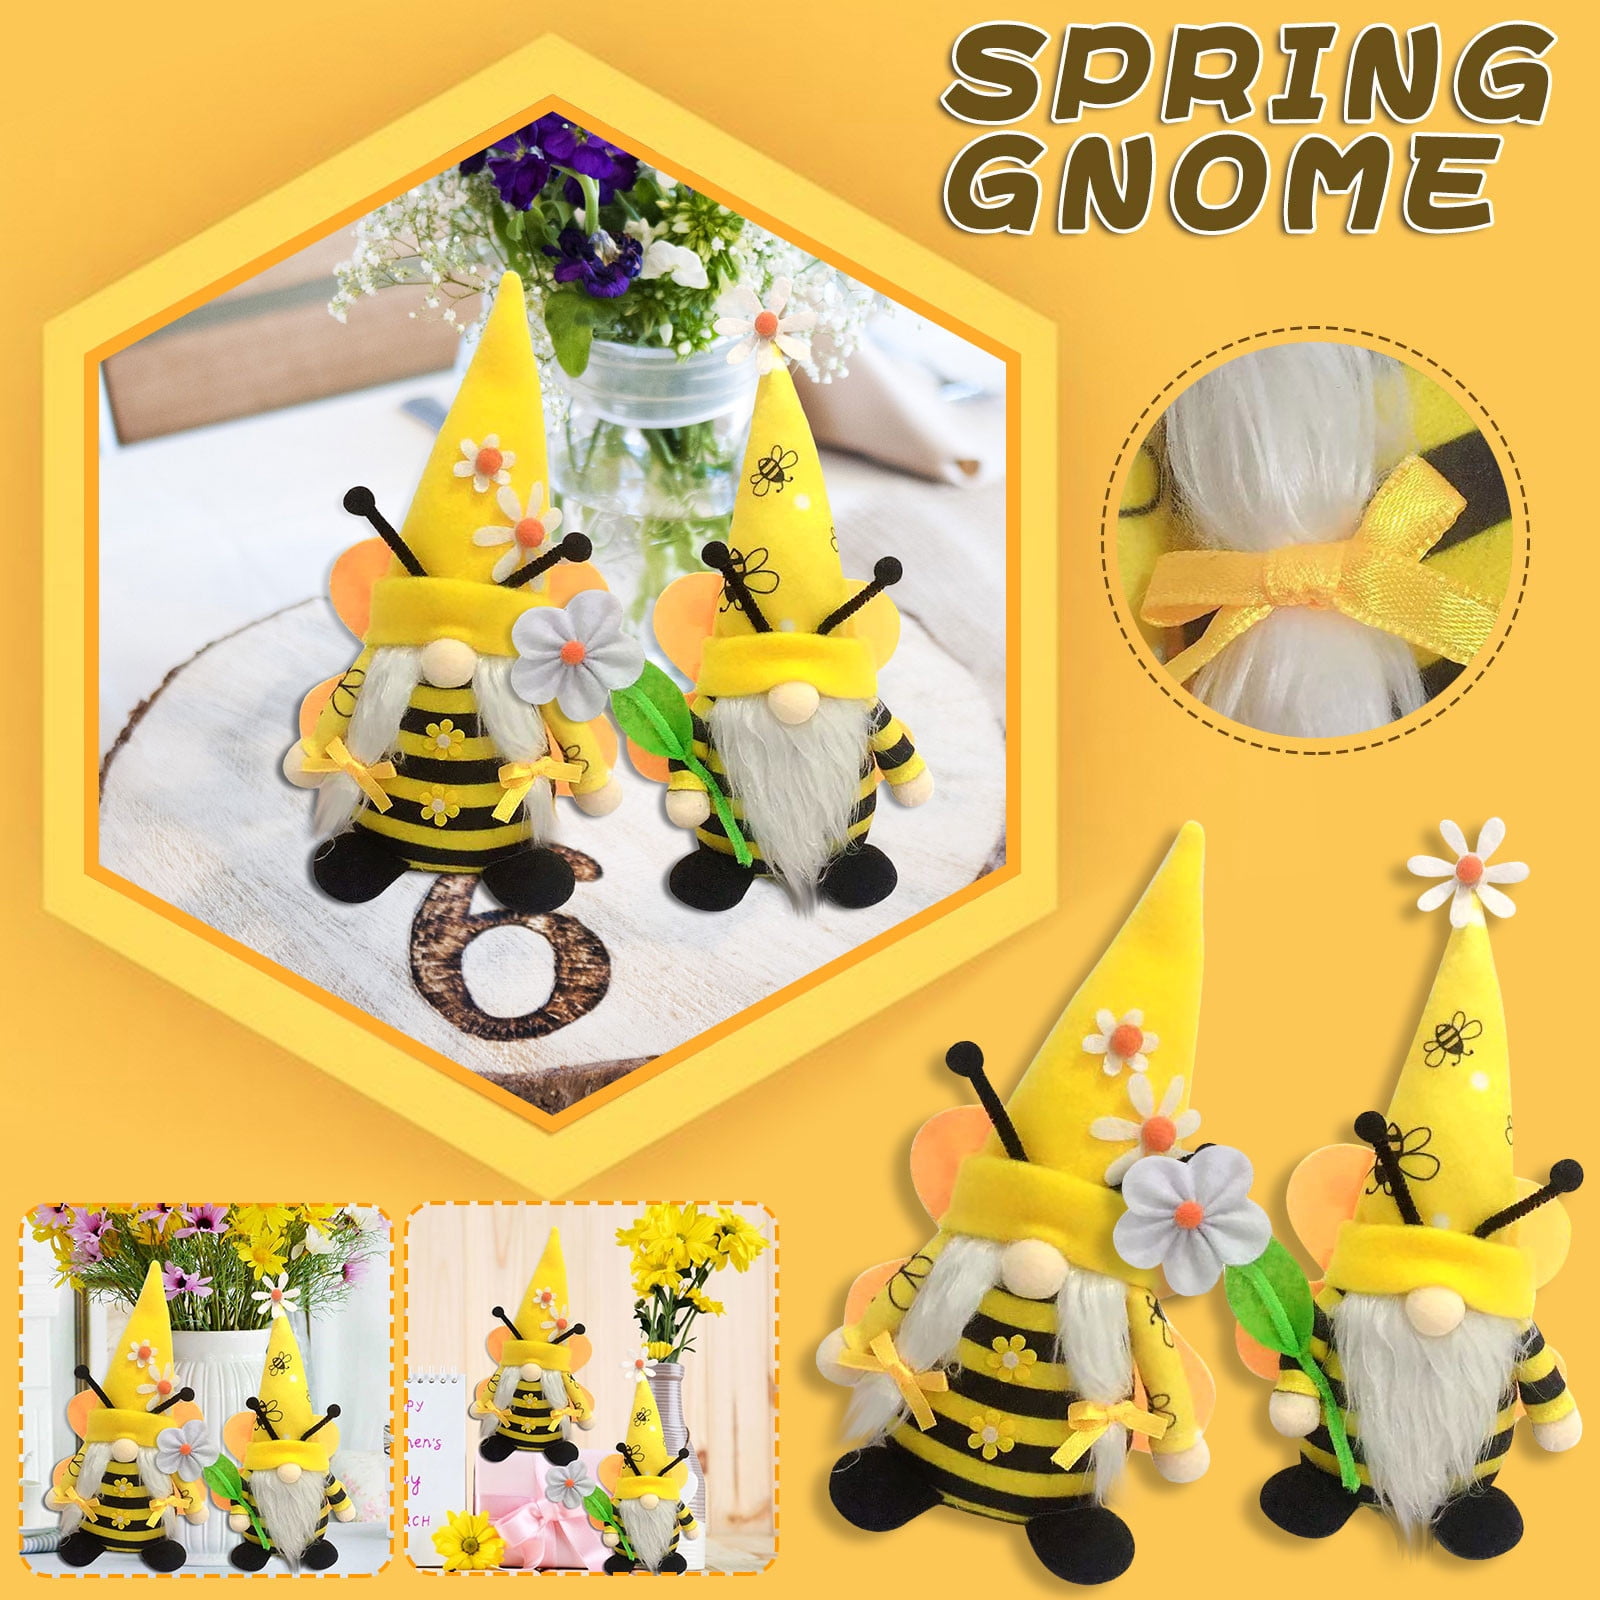 Details about   Bumble Bee Gnomes Plush Scandinavian Tomte Nisse Swedish Decorations Bee Elfs 